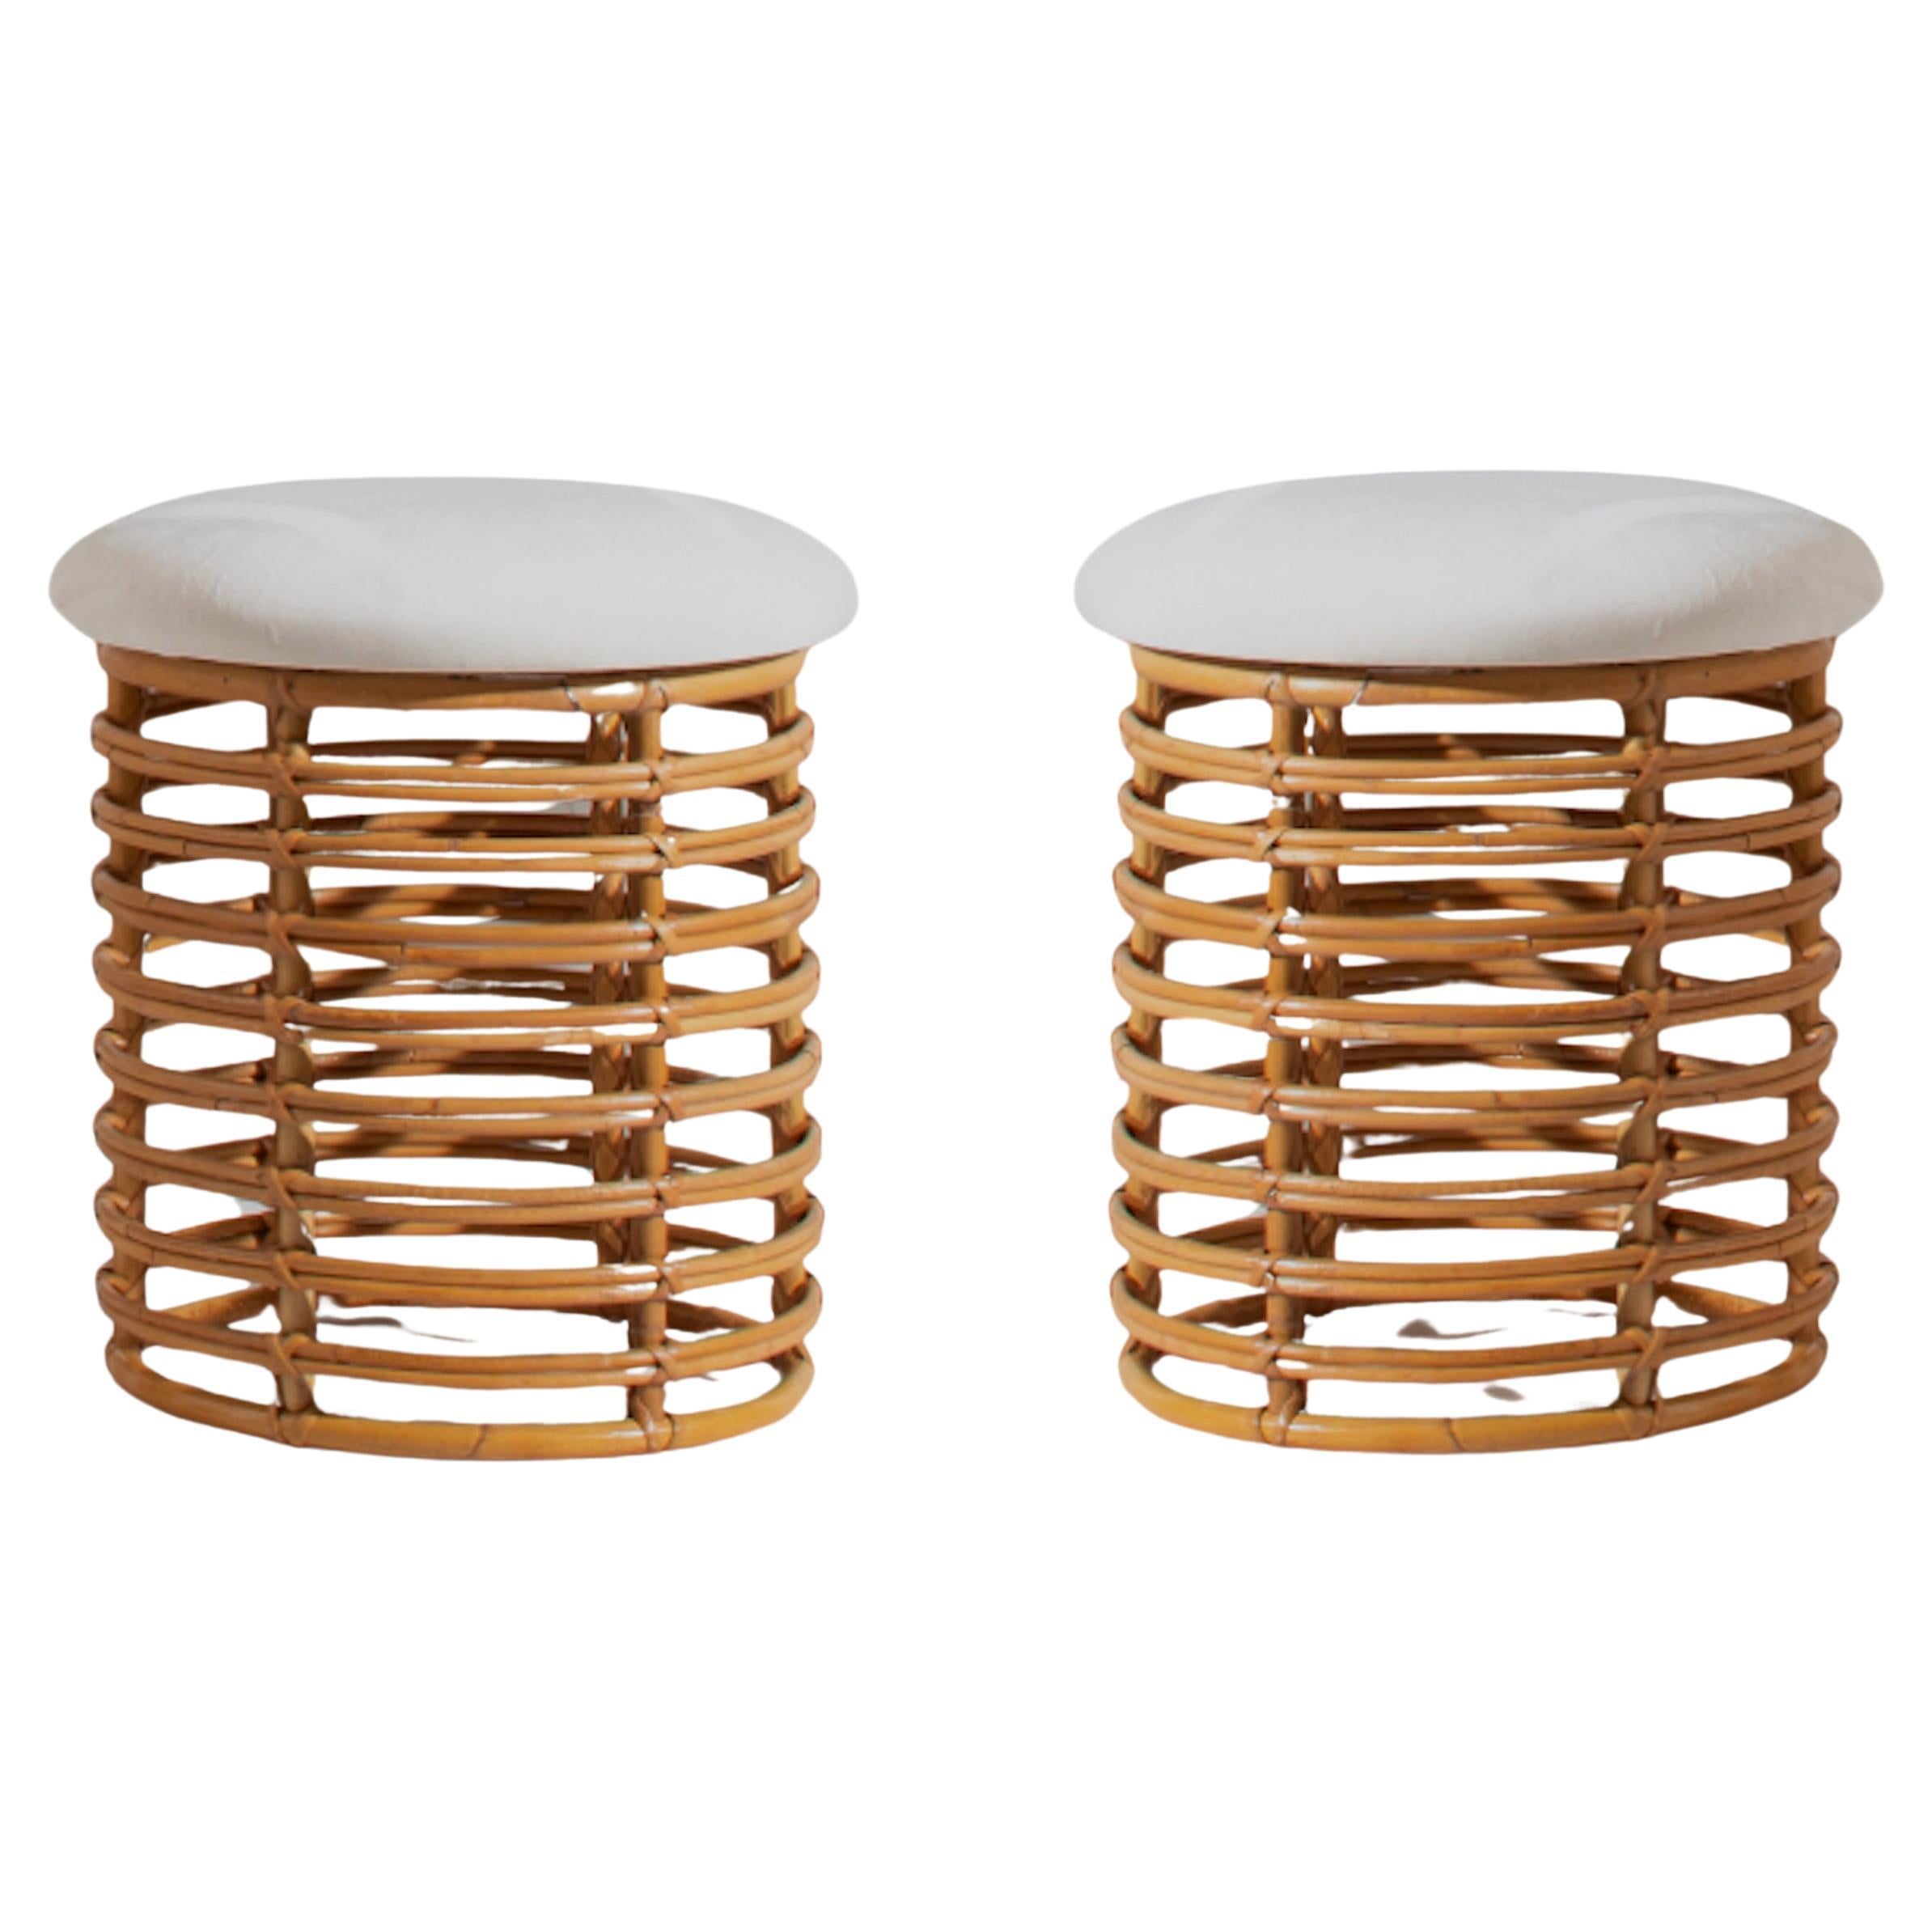 Tito Agnoli, Pair of Stools, Rattan, Bamboo, Italy, 1960s For Sale